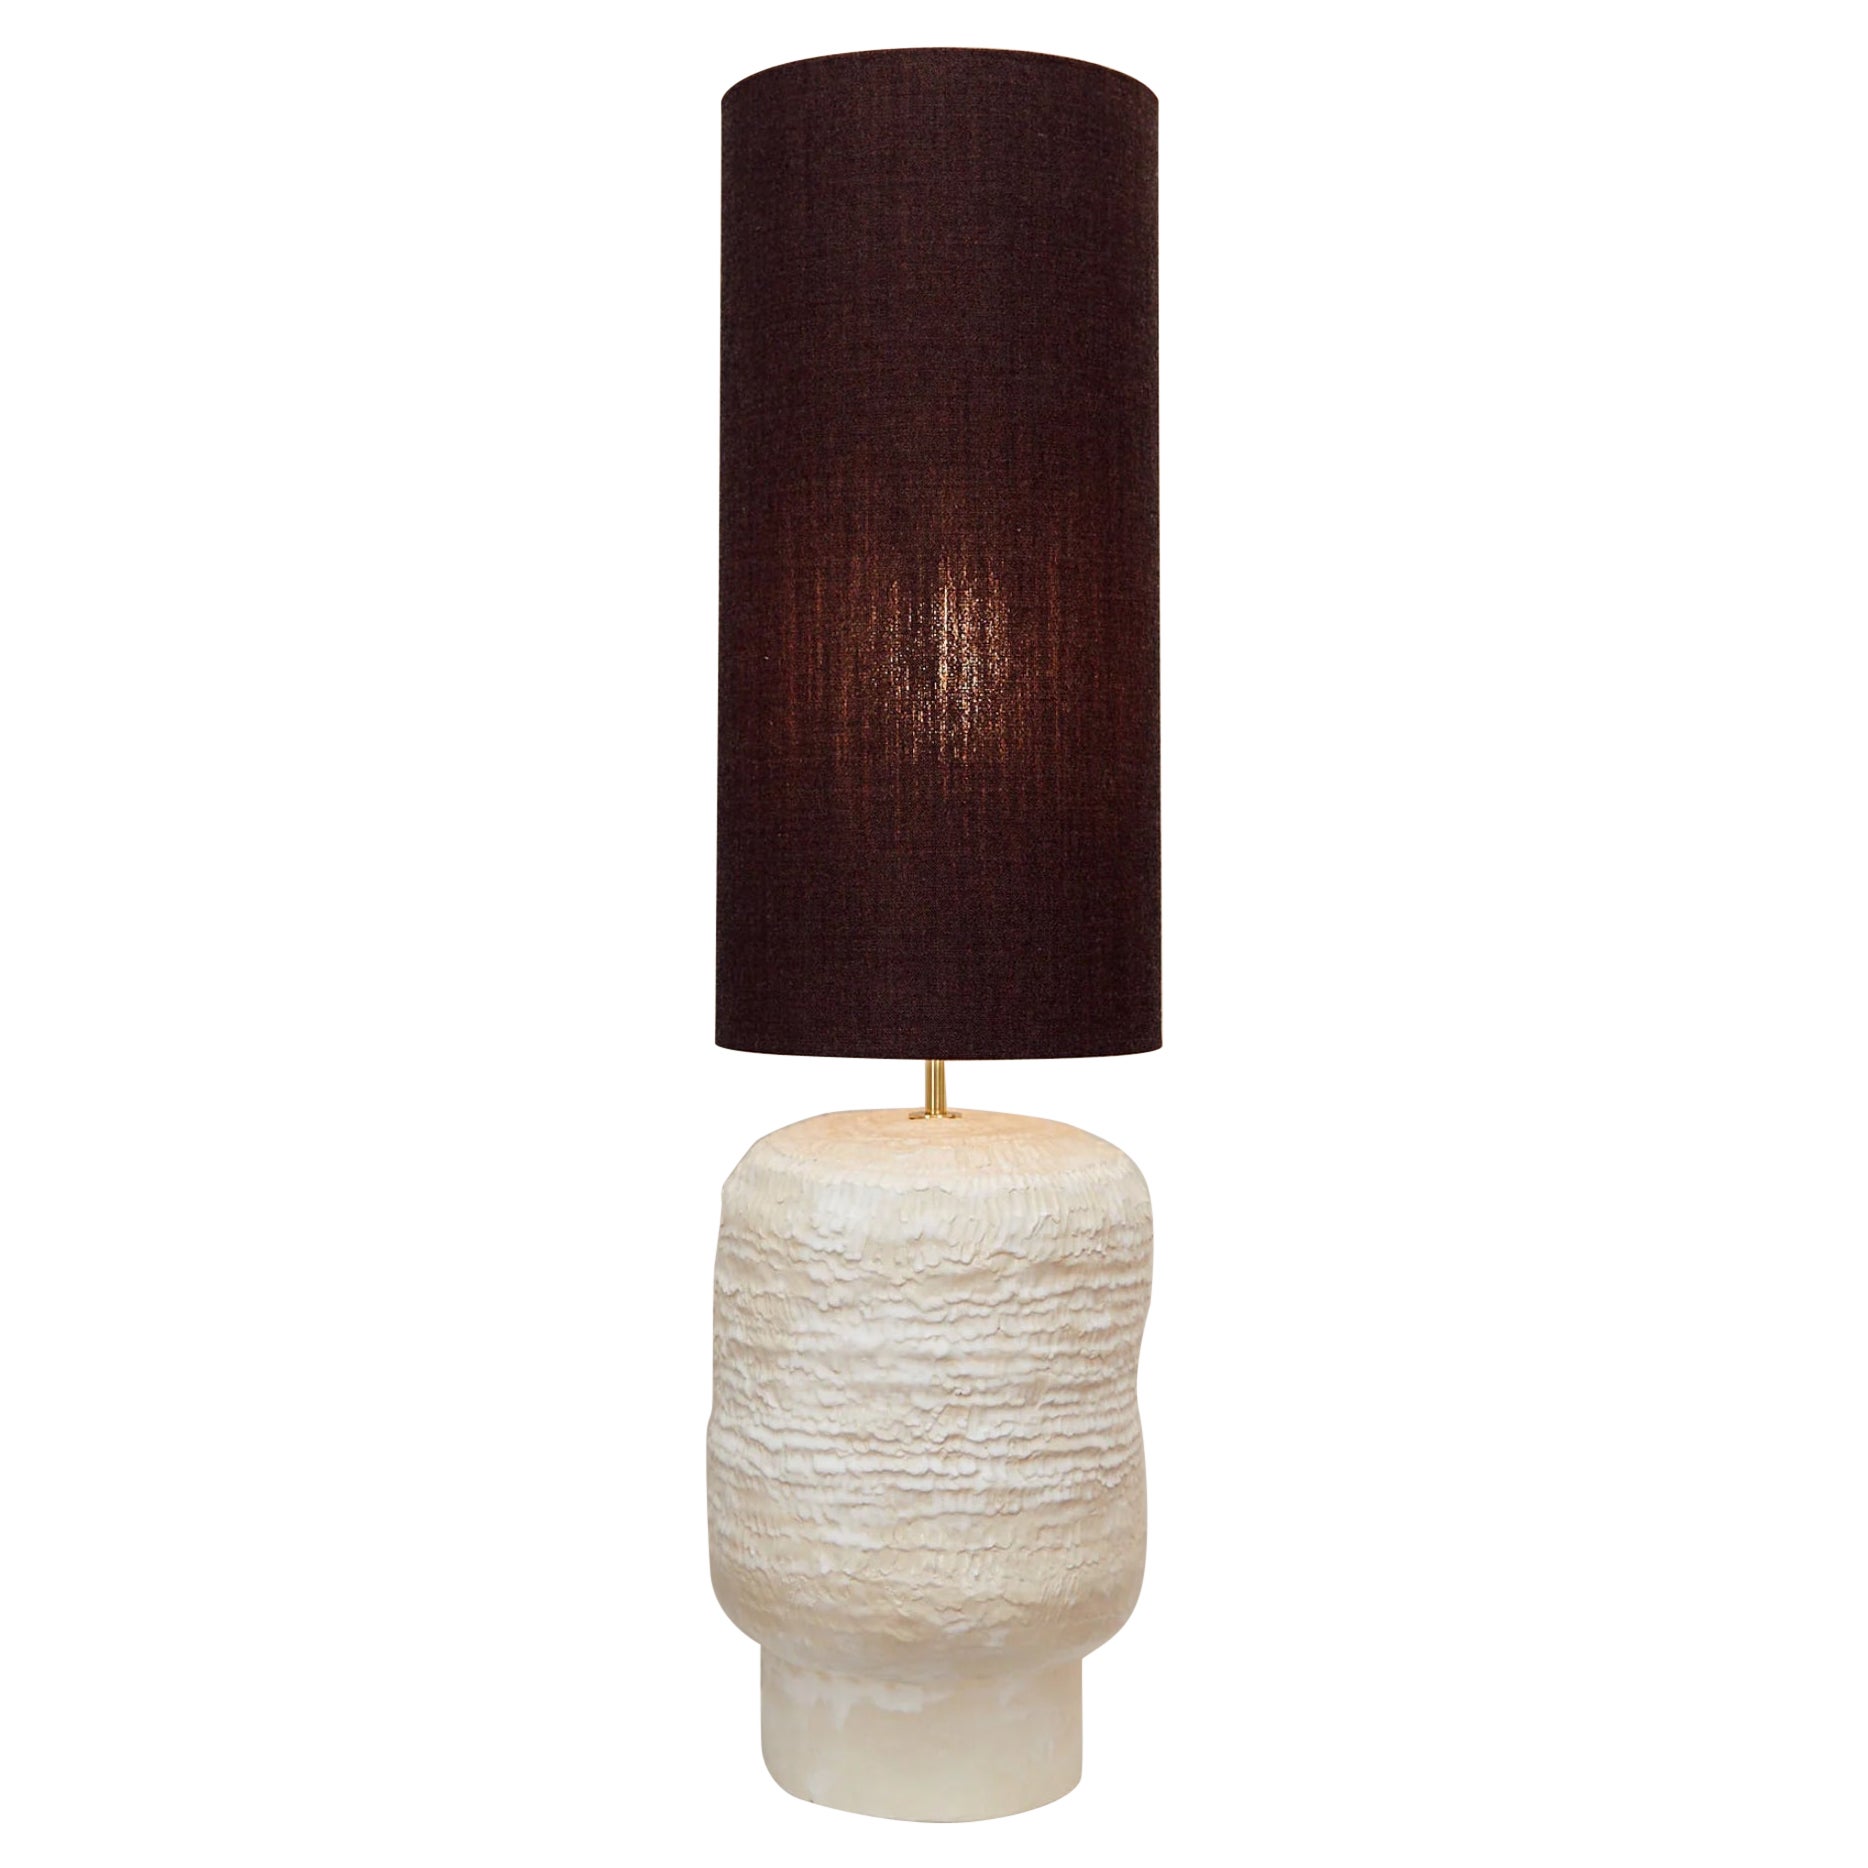 Textured Ceramic Lamp by Project 213A For Sale